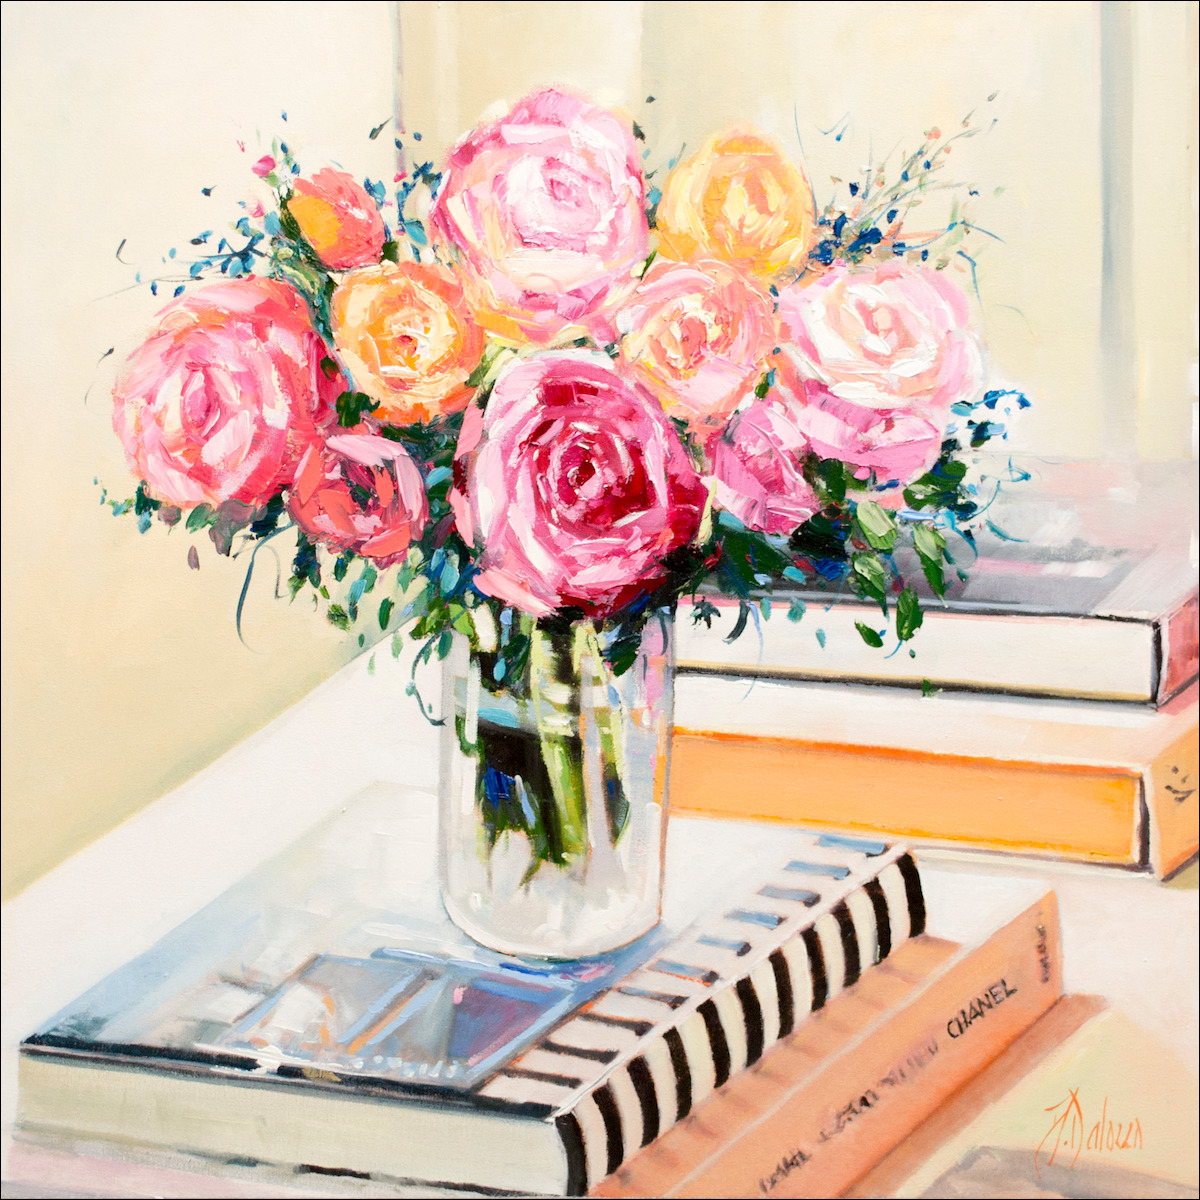 Floral Still Life Painting "Summer Favourites" by Judith Dalozzo